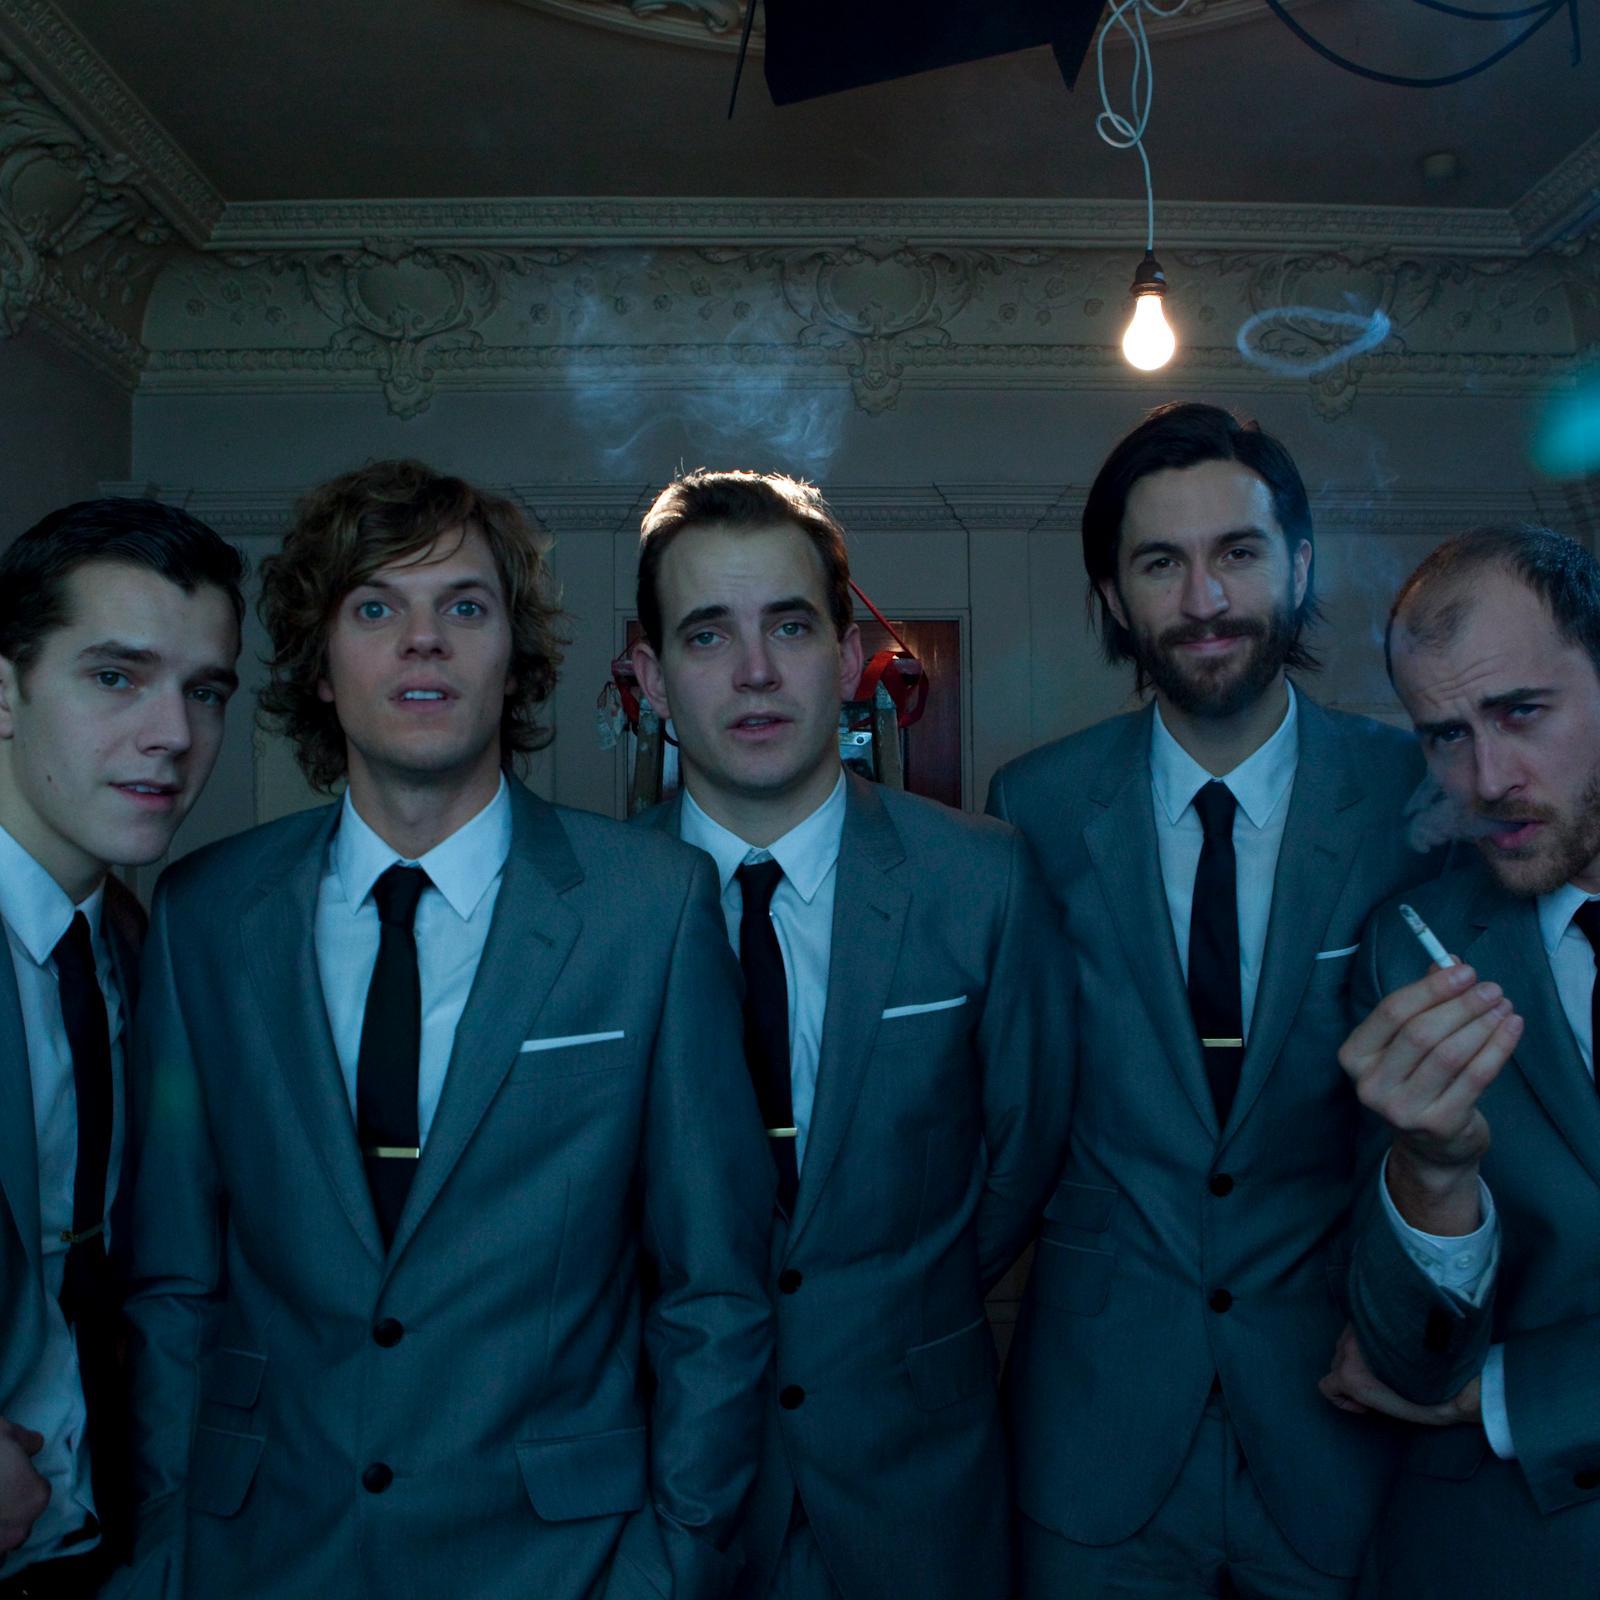 The Paris Quintet is a film about five men in matching suits living in a one bedroom apartment in Paris all in love with the same woman.